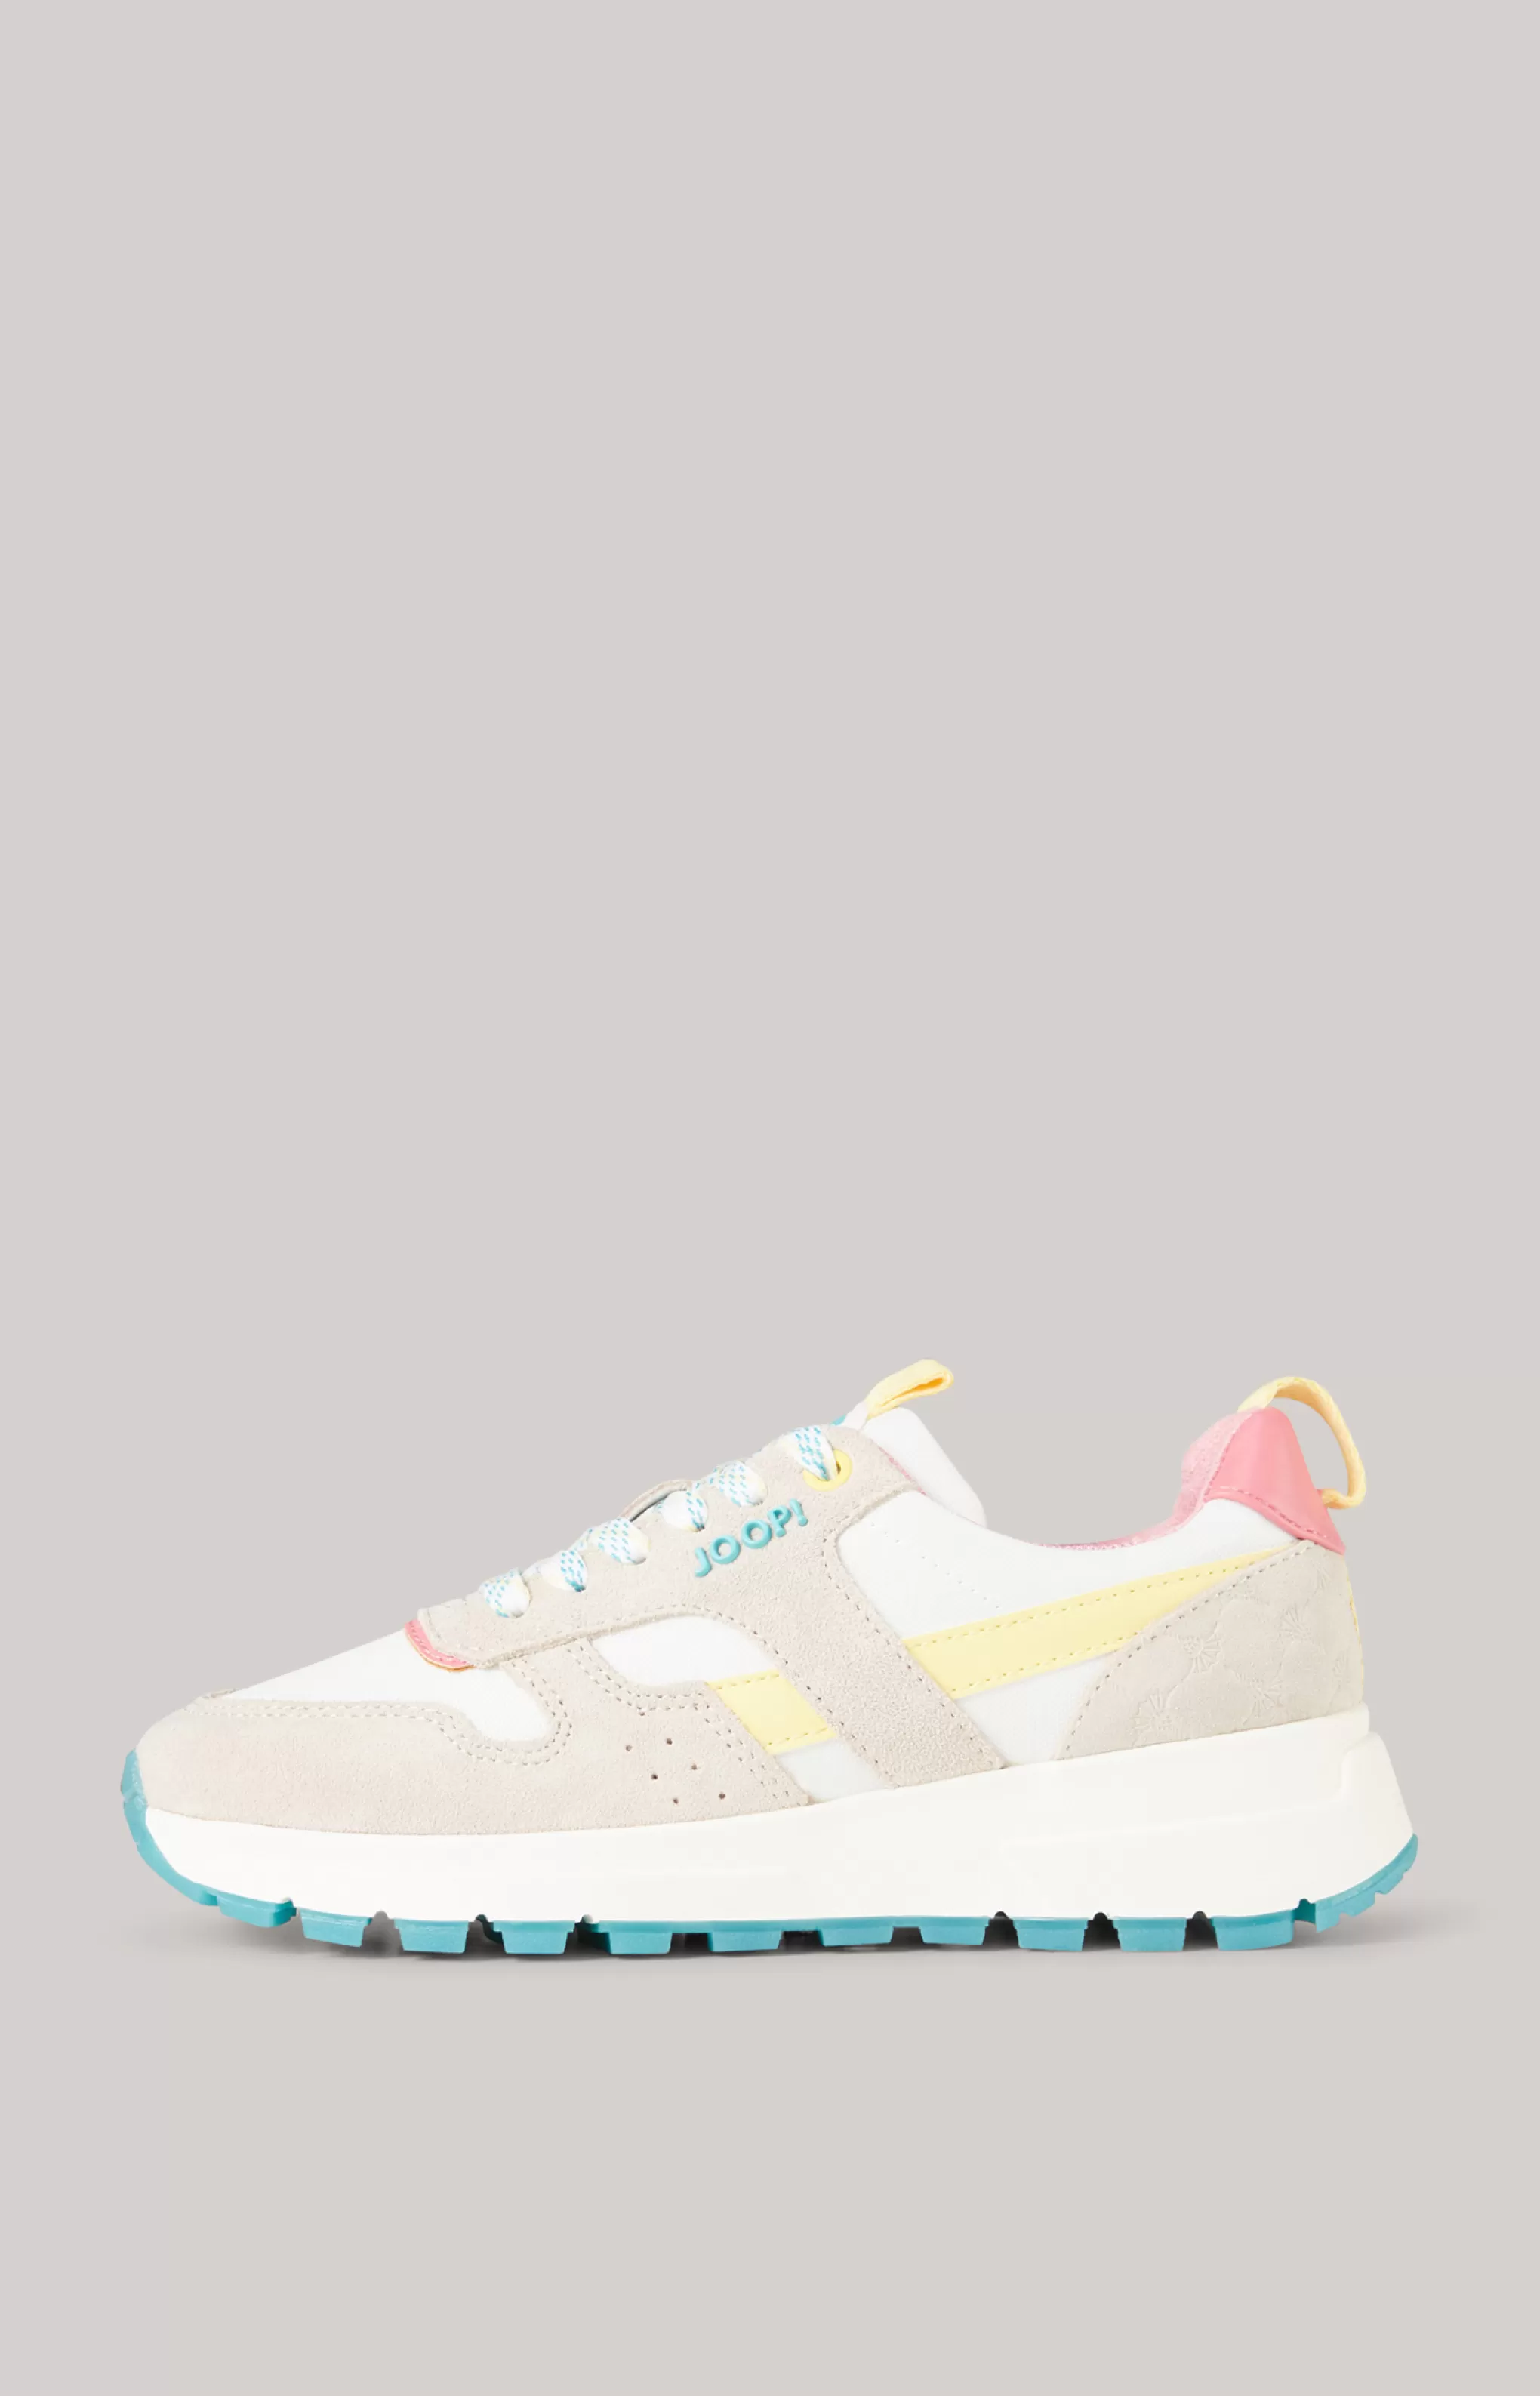 Shoes*JOOP Shoes Retron Hanna Trainers in /Light Pink